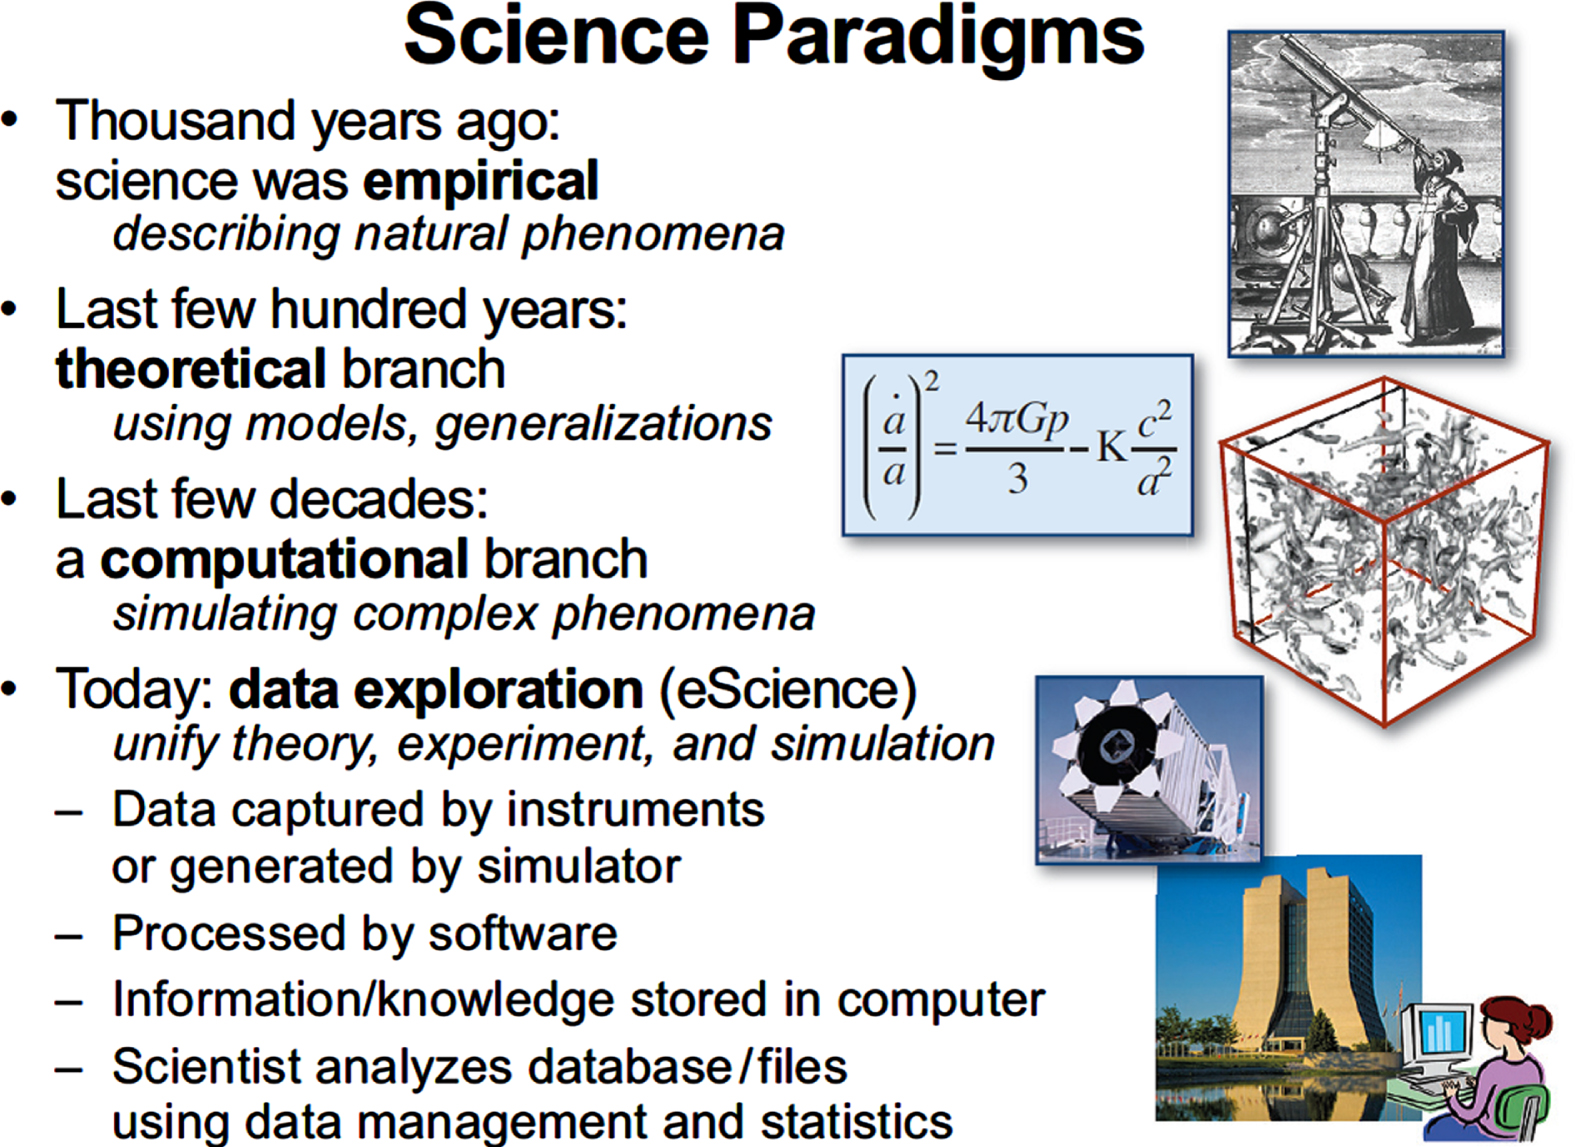 Four Paradigms in Scientific Research, Slide from (Gray, 2007; Hey et al., 2009).